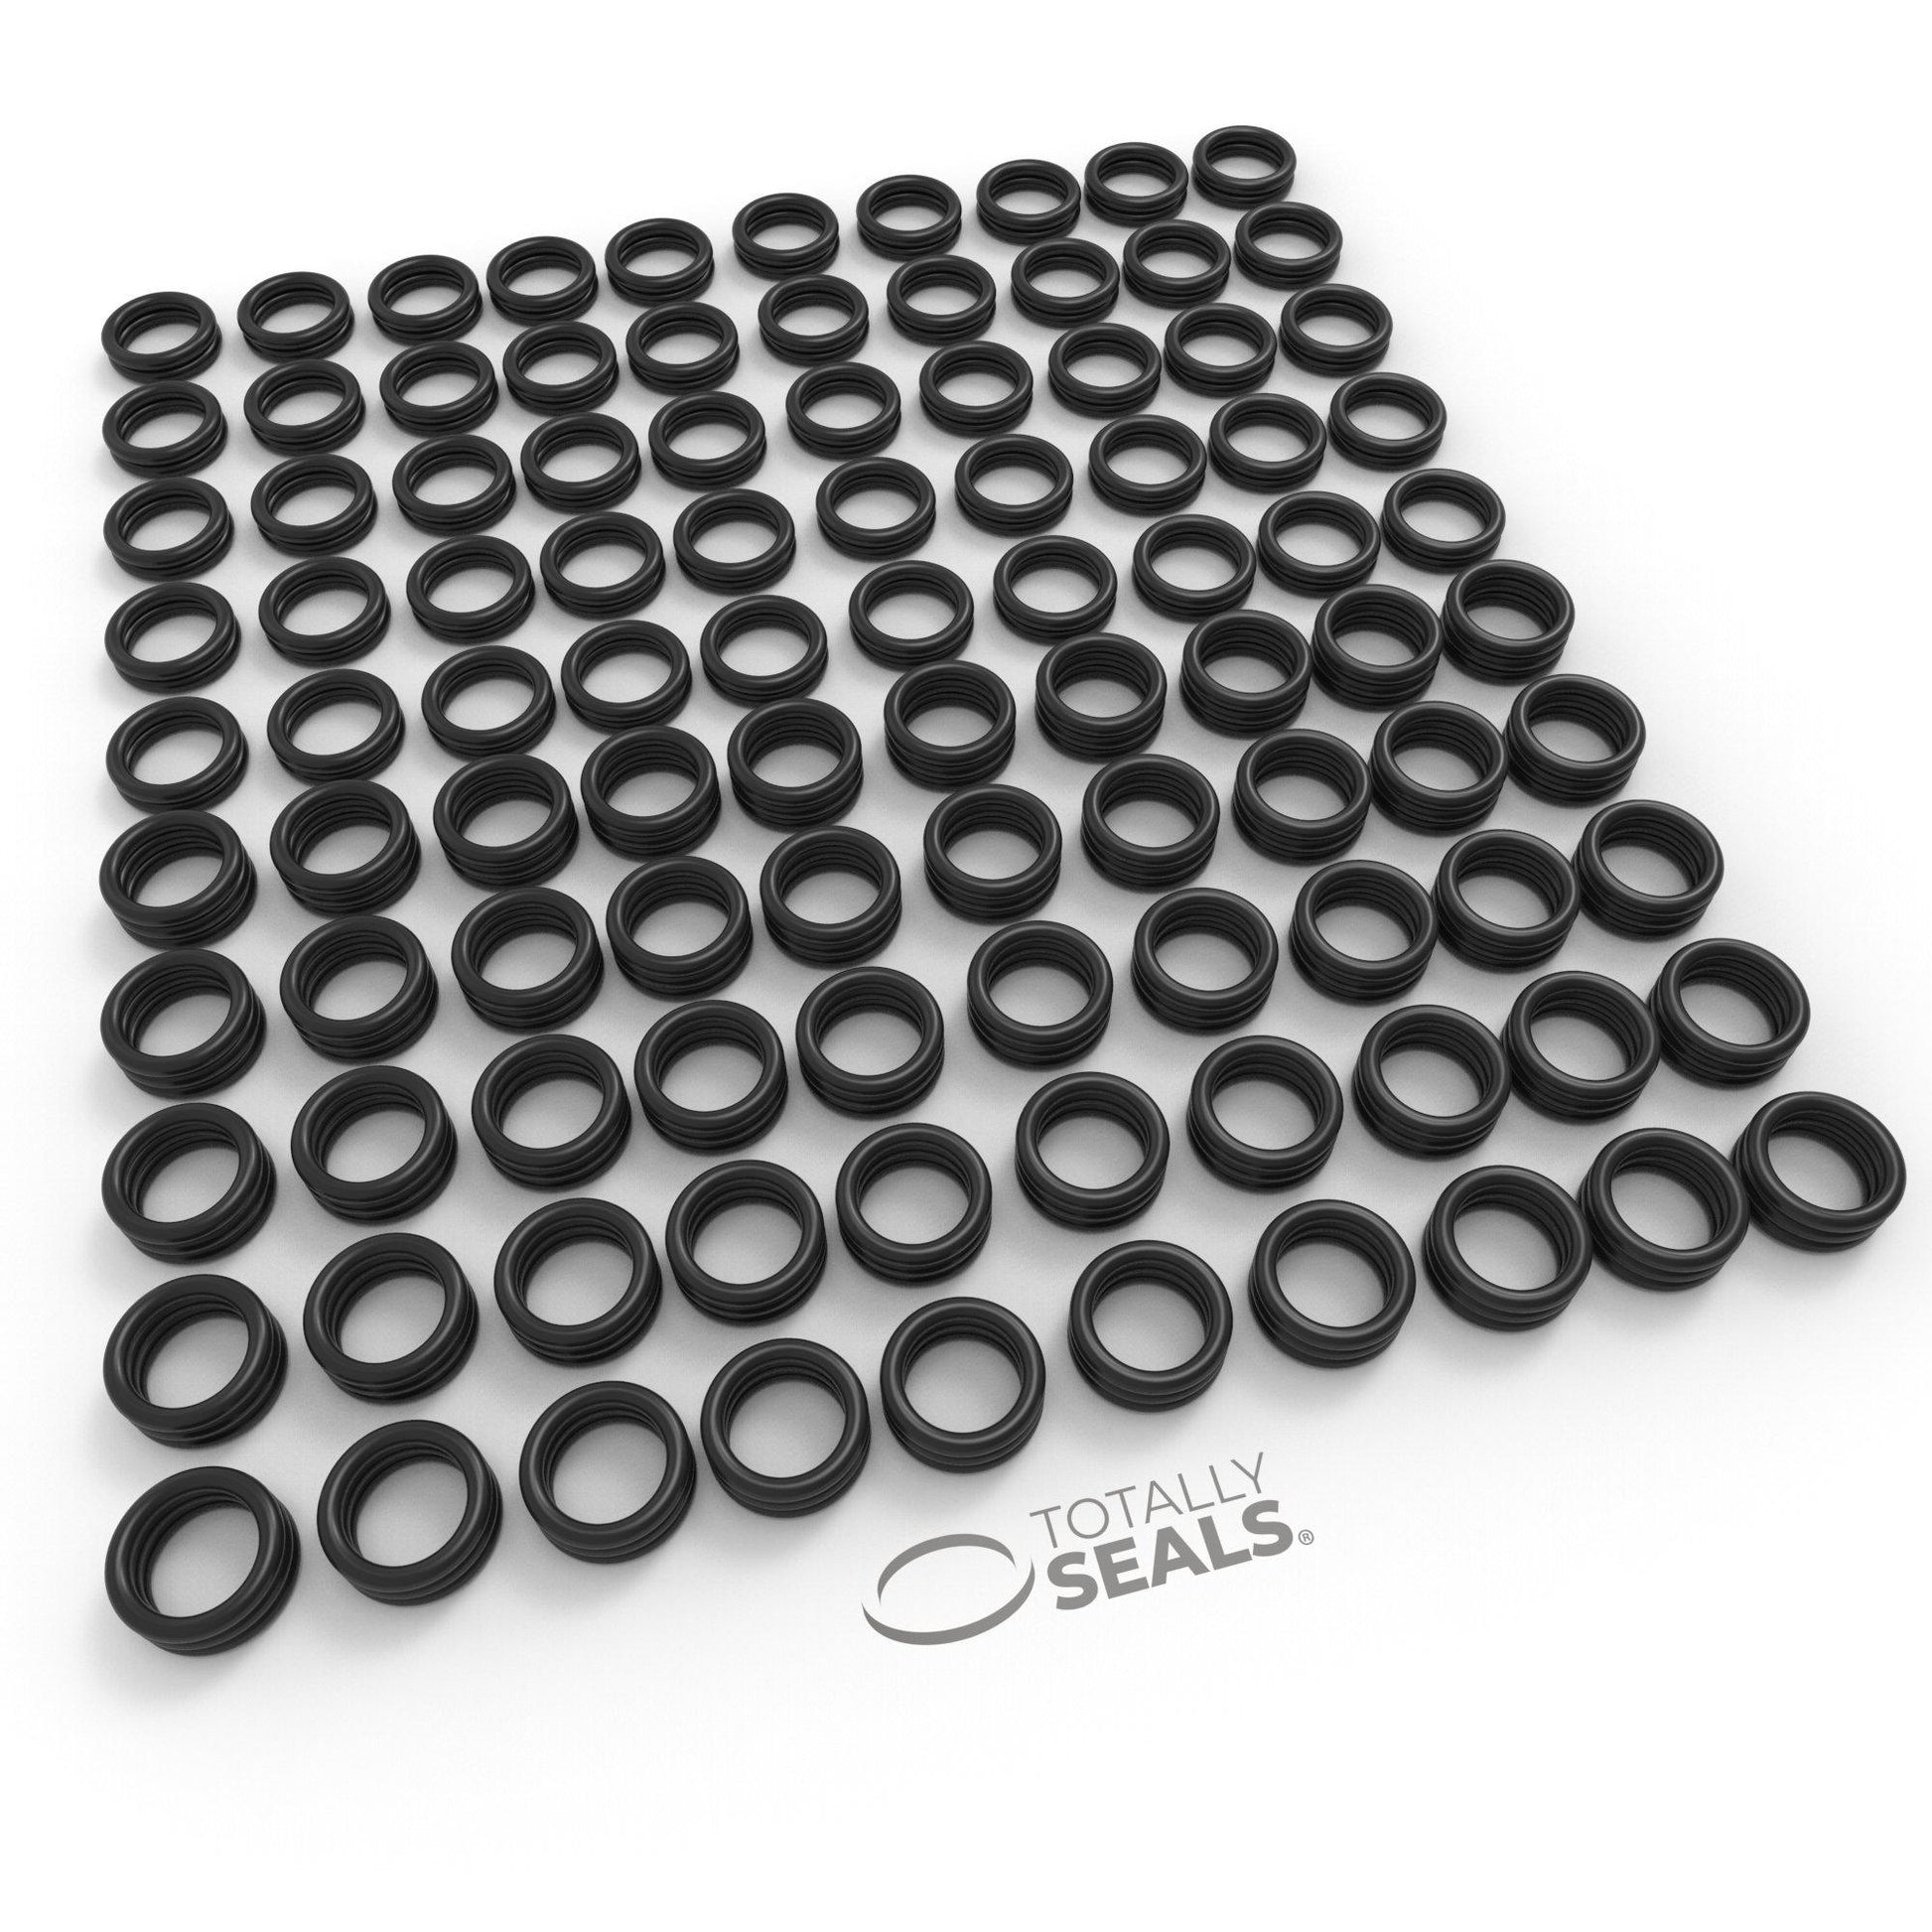 34mm x 2mm (38mm OD) Nitrile O-Rings - Totally Seals®